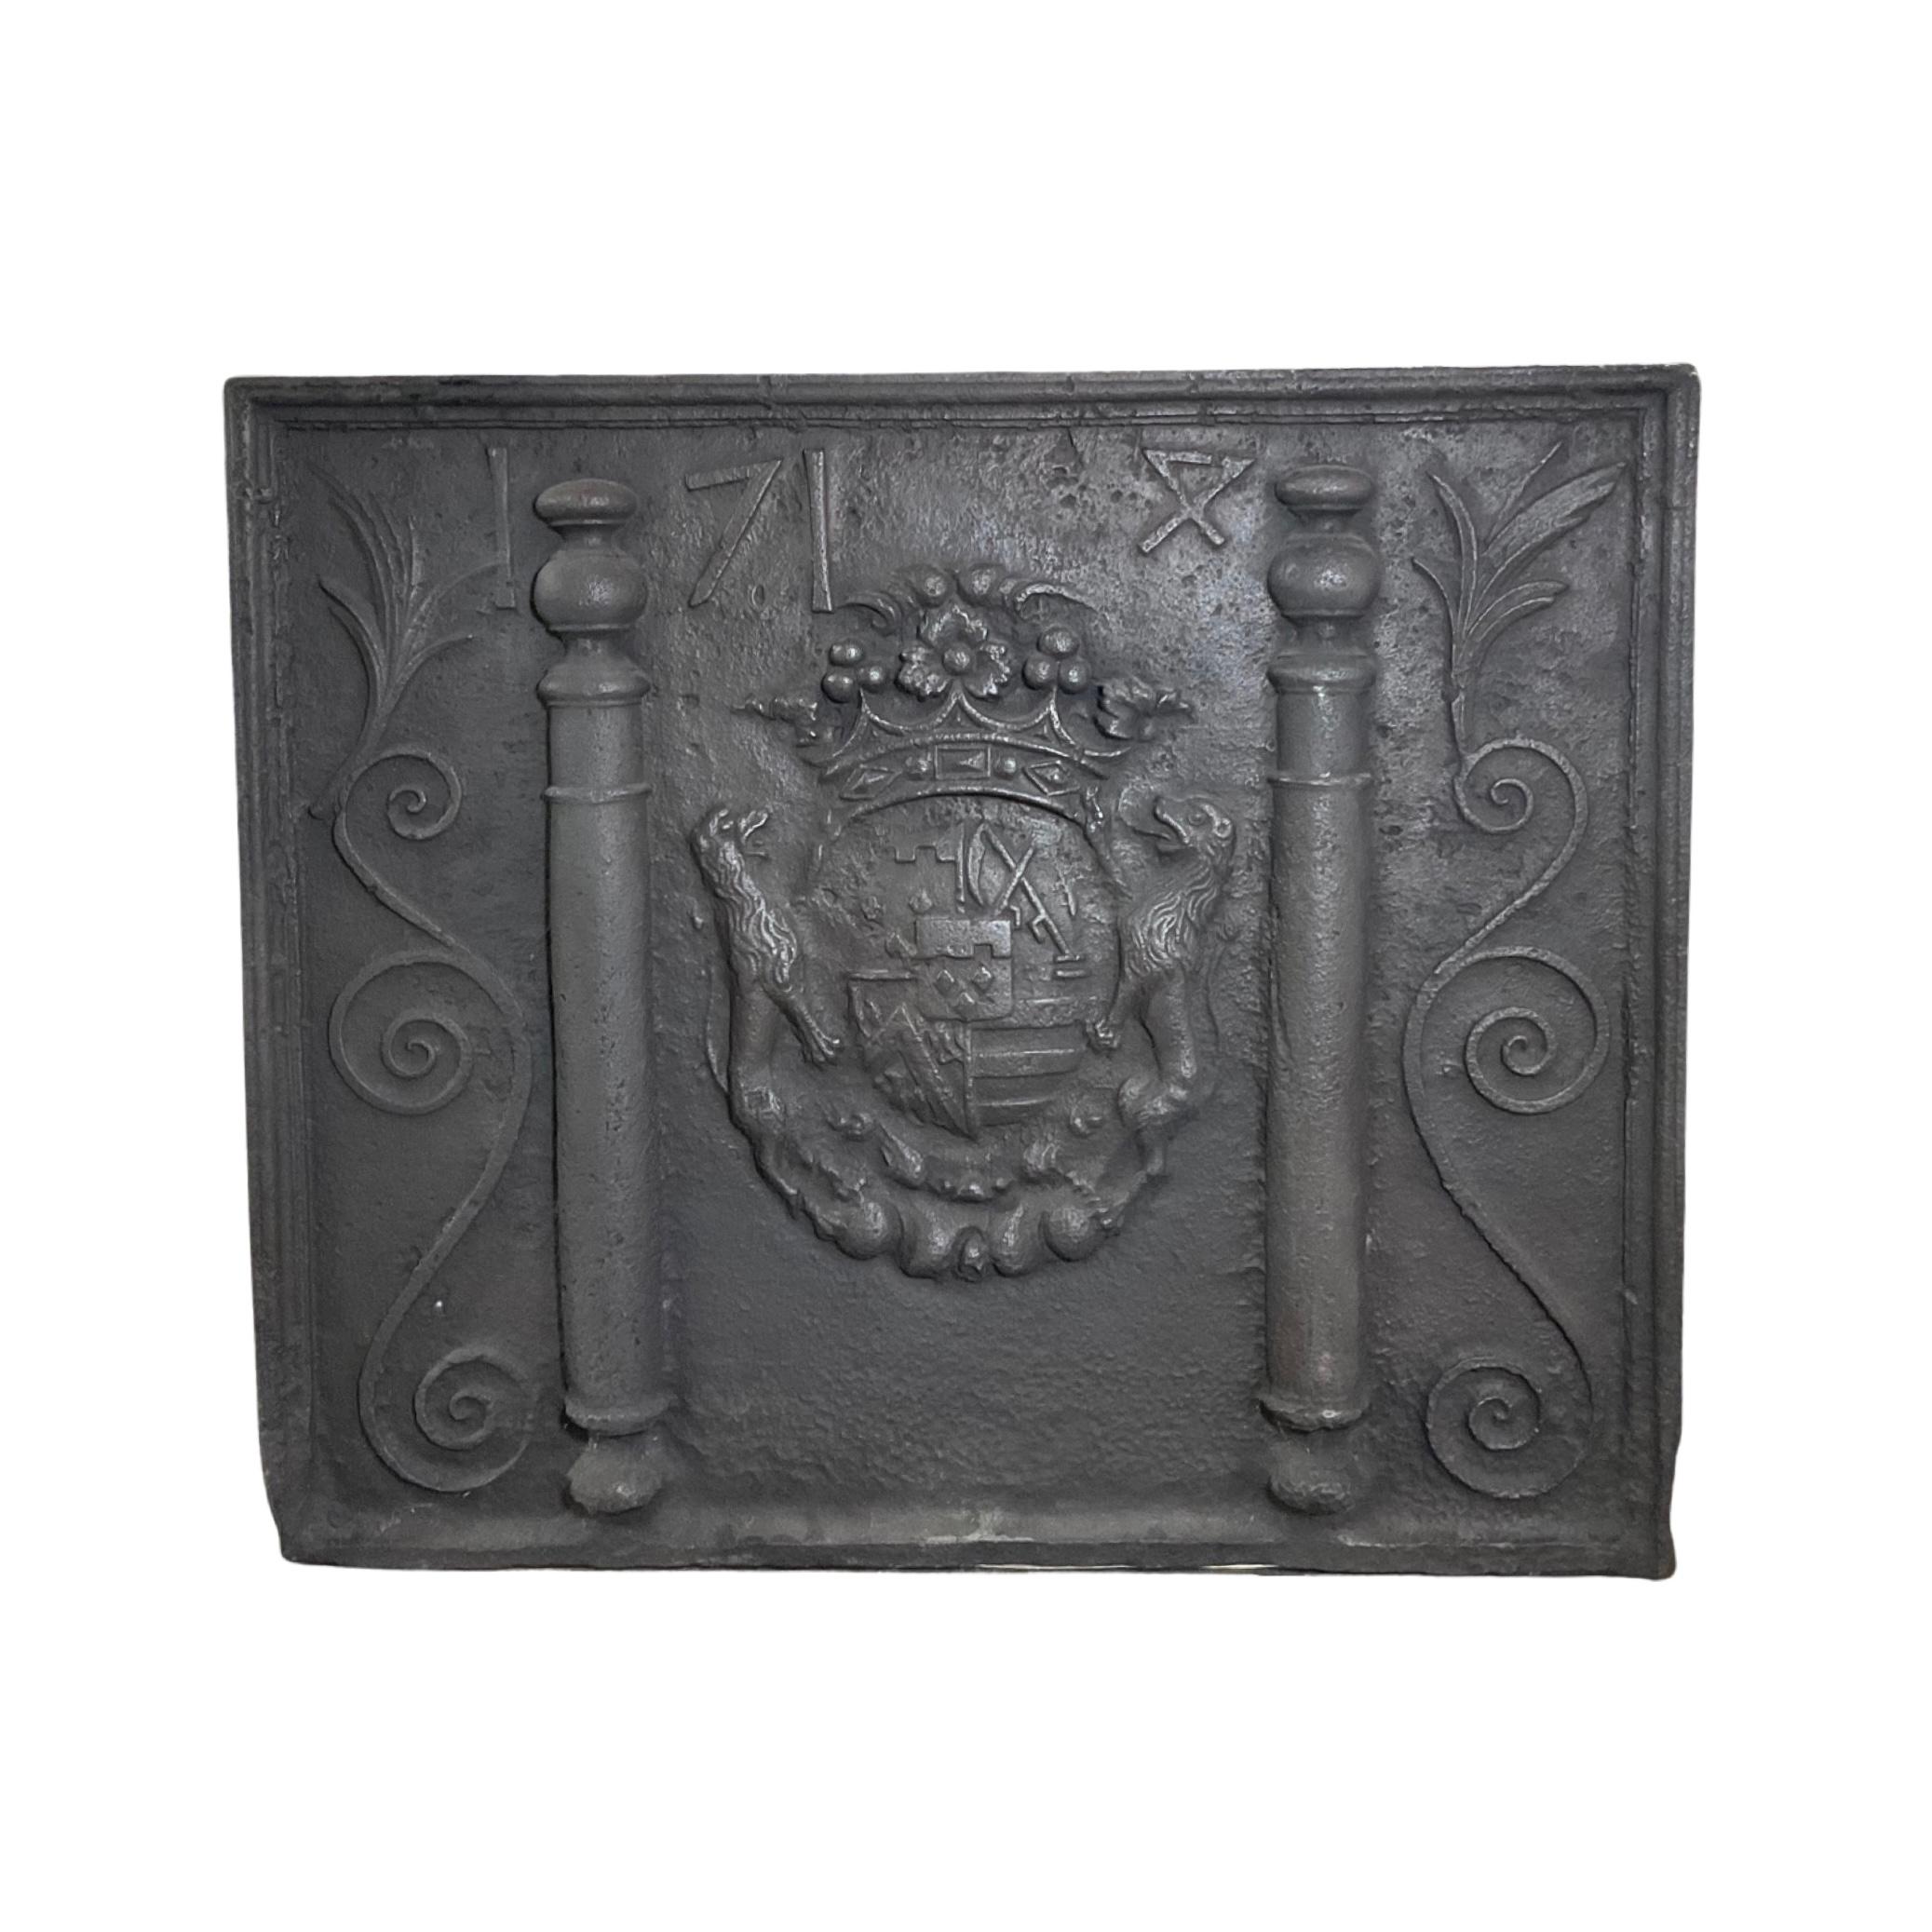 This antique fireback is a rare find from the 17th century. Hand-carved details give it unique character, and its French iron construction ensures durability. This piece is perfect for adding a touch of historical charm to your home.